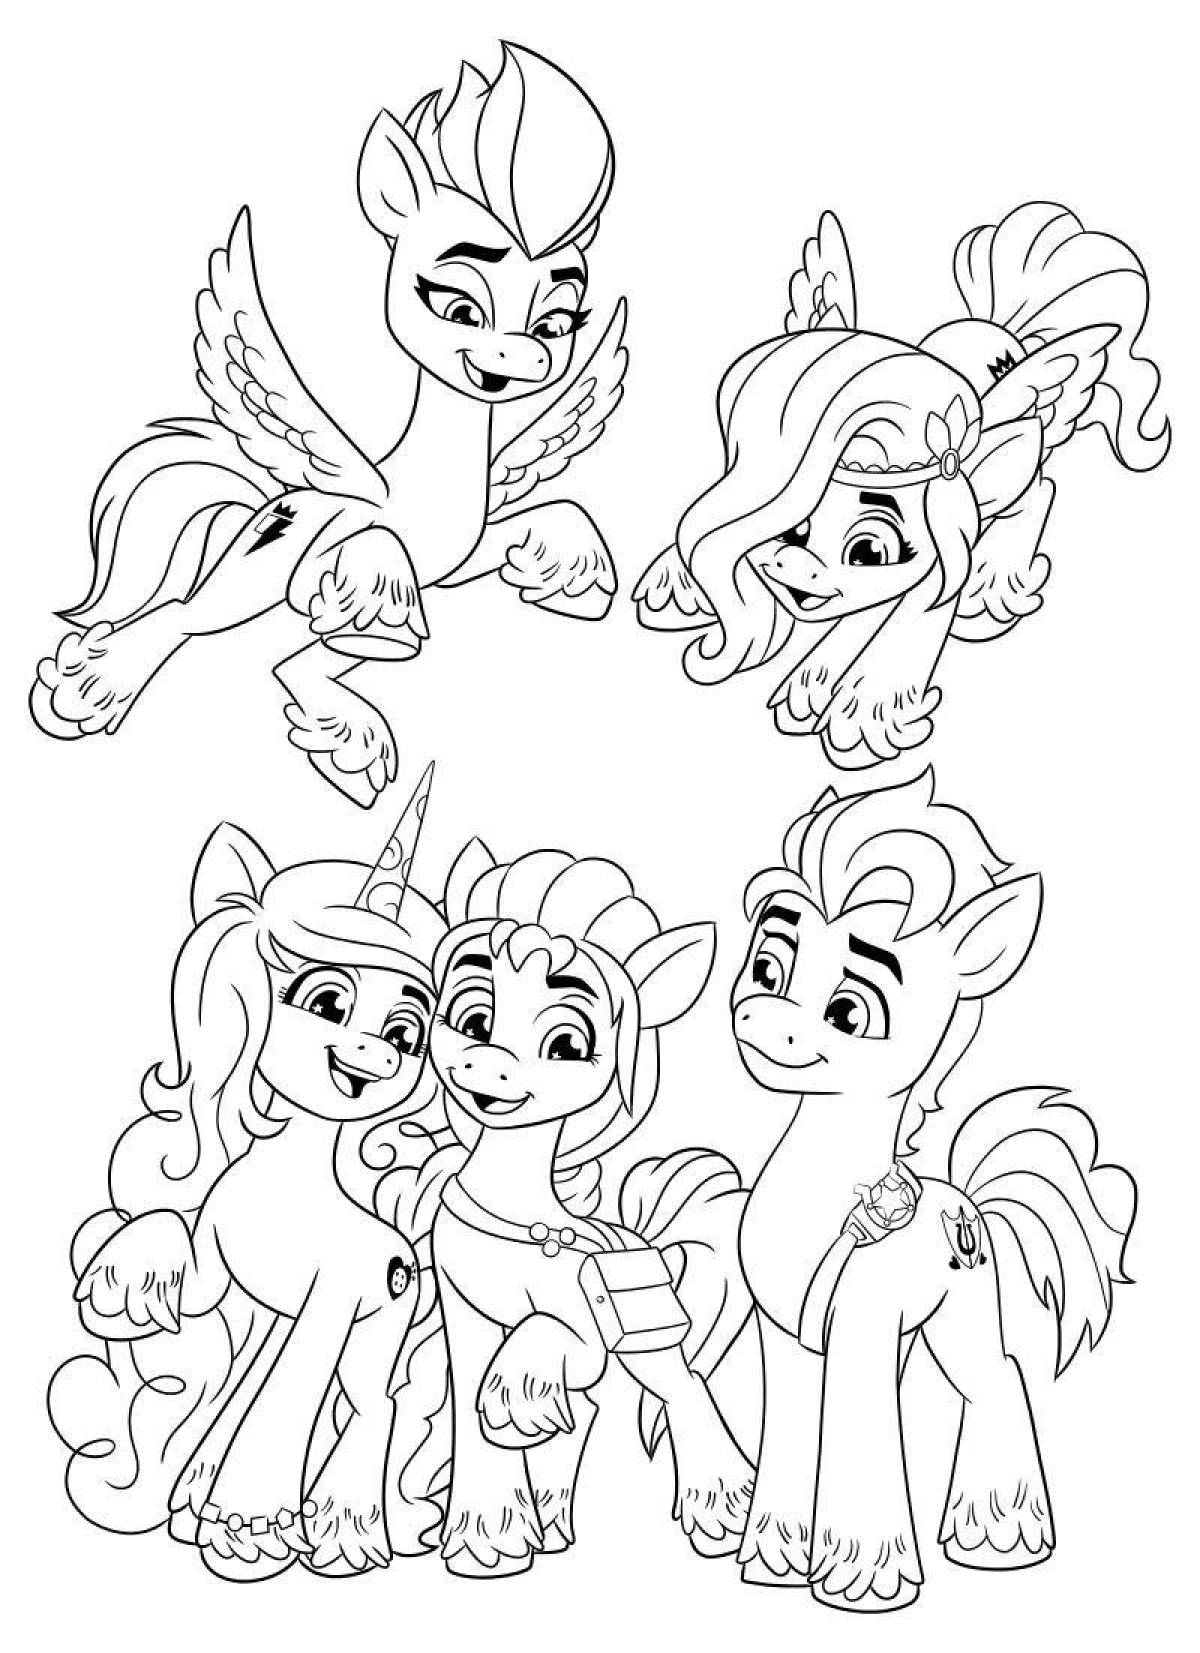 Colorful pony izzy coloring page